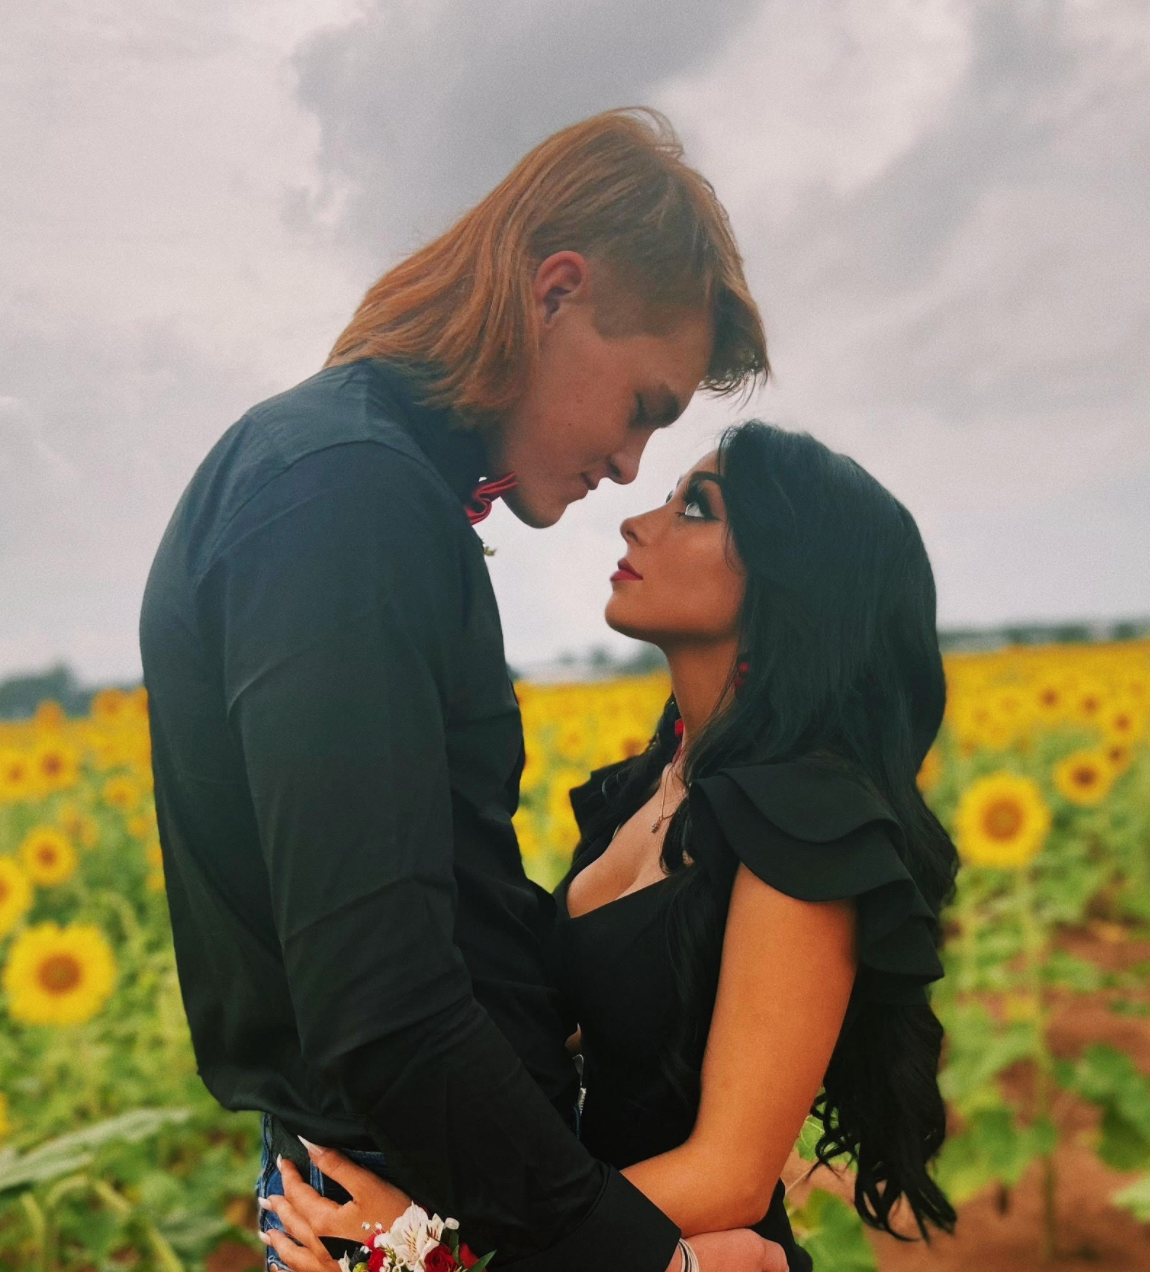 Zach and Grace gazing at each other amid sunflowers